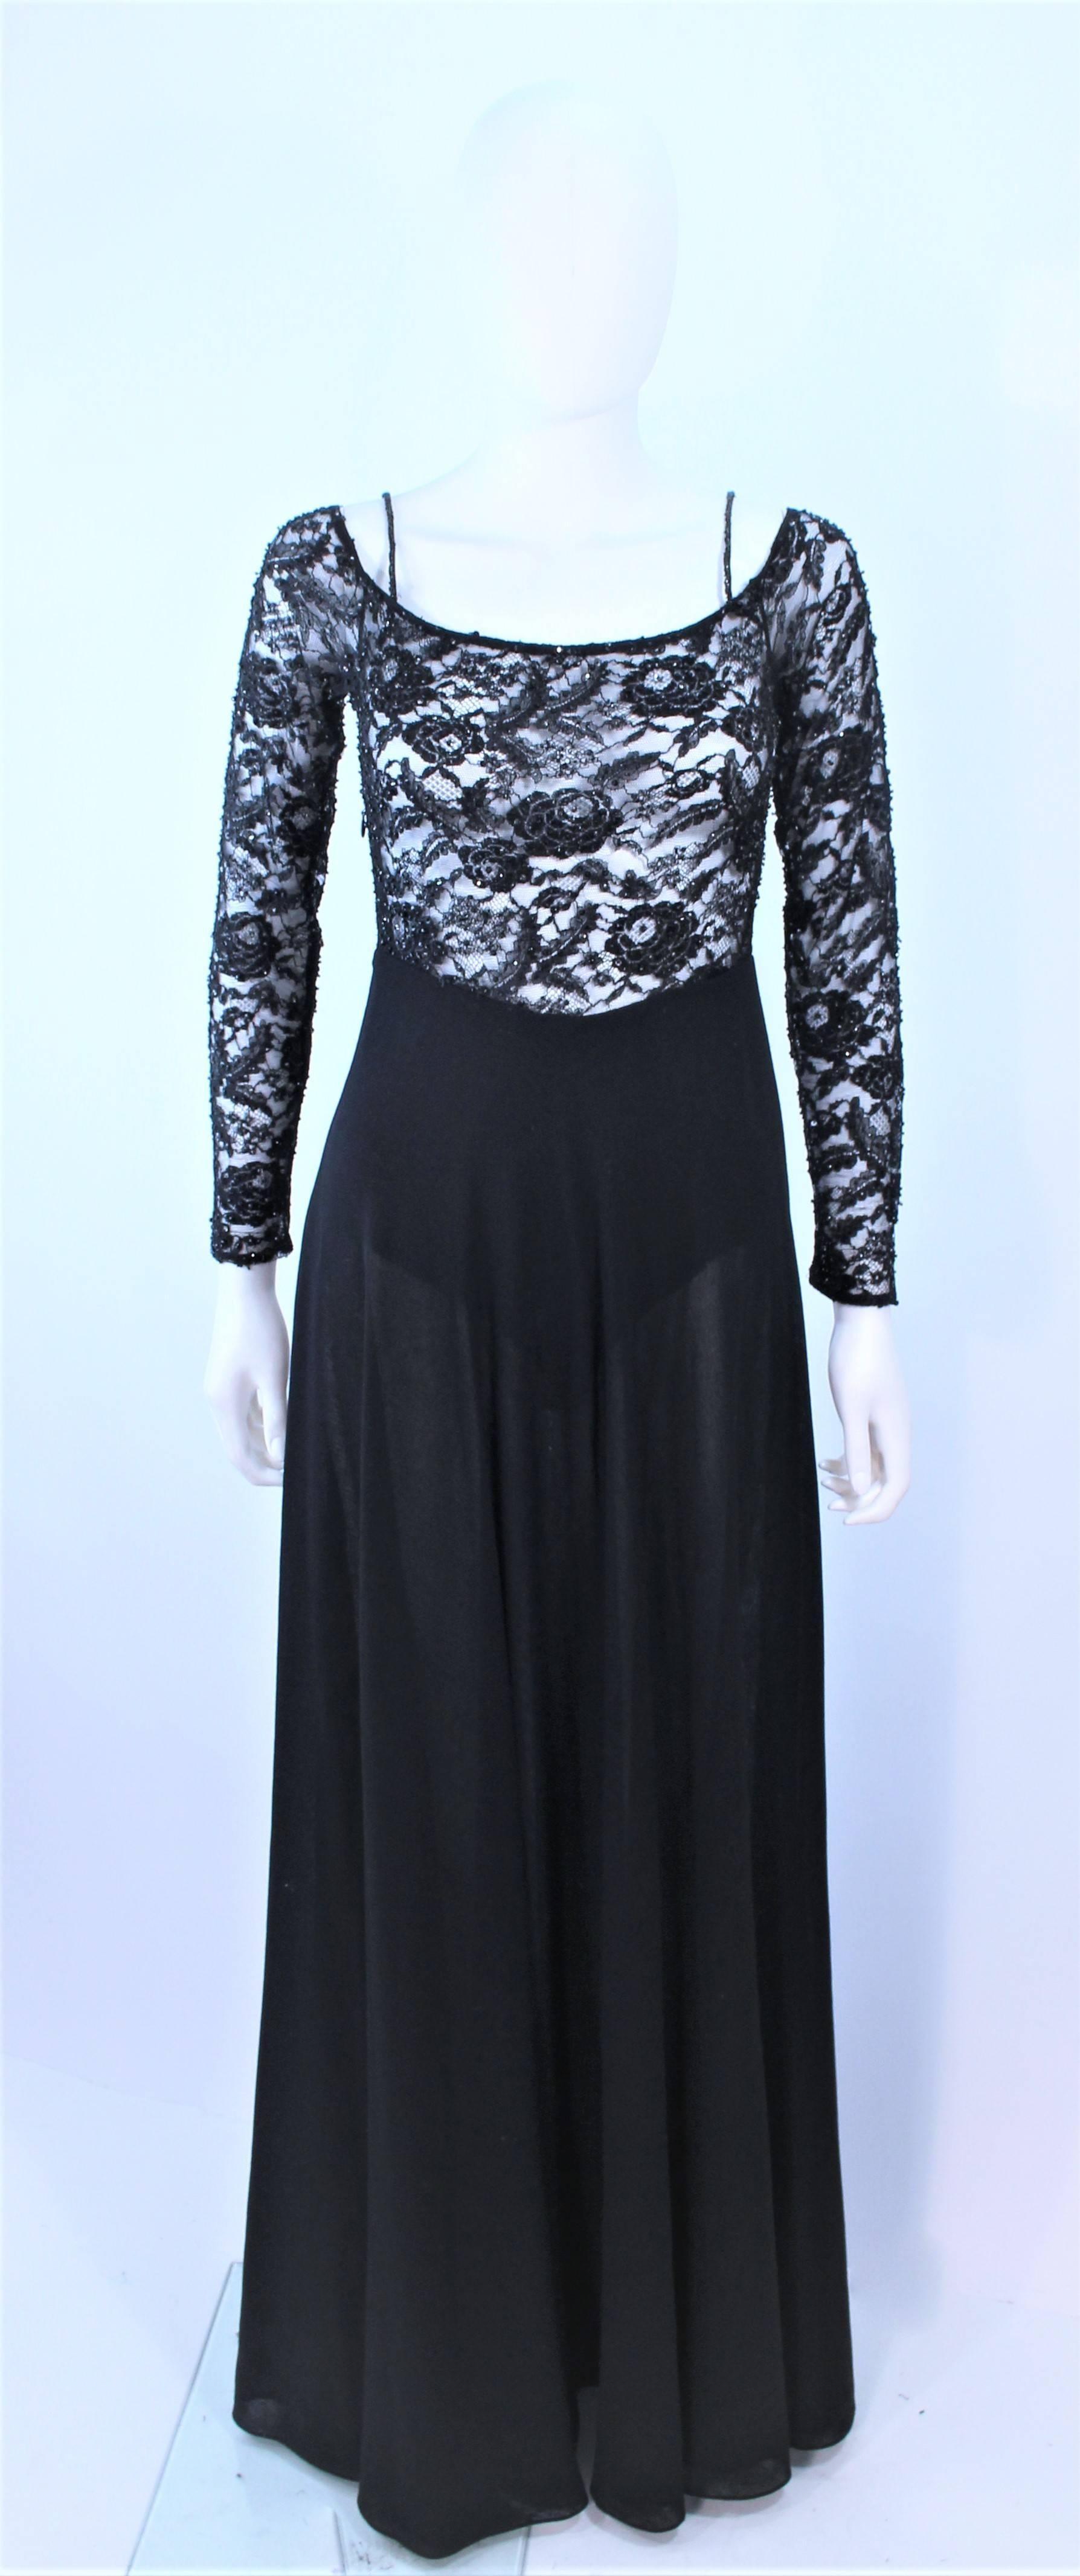 DONNA KARAN Black Lace Beaded Wool Gown Size 4 6 In Excellent Condition For Sale In Los Angeles, CA